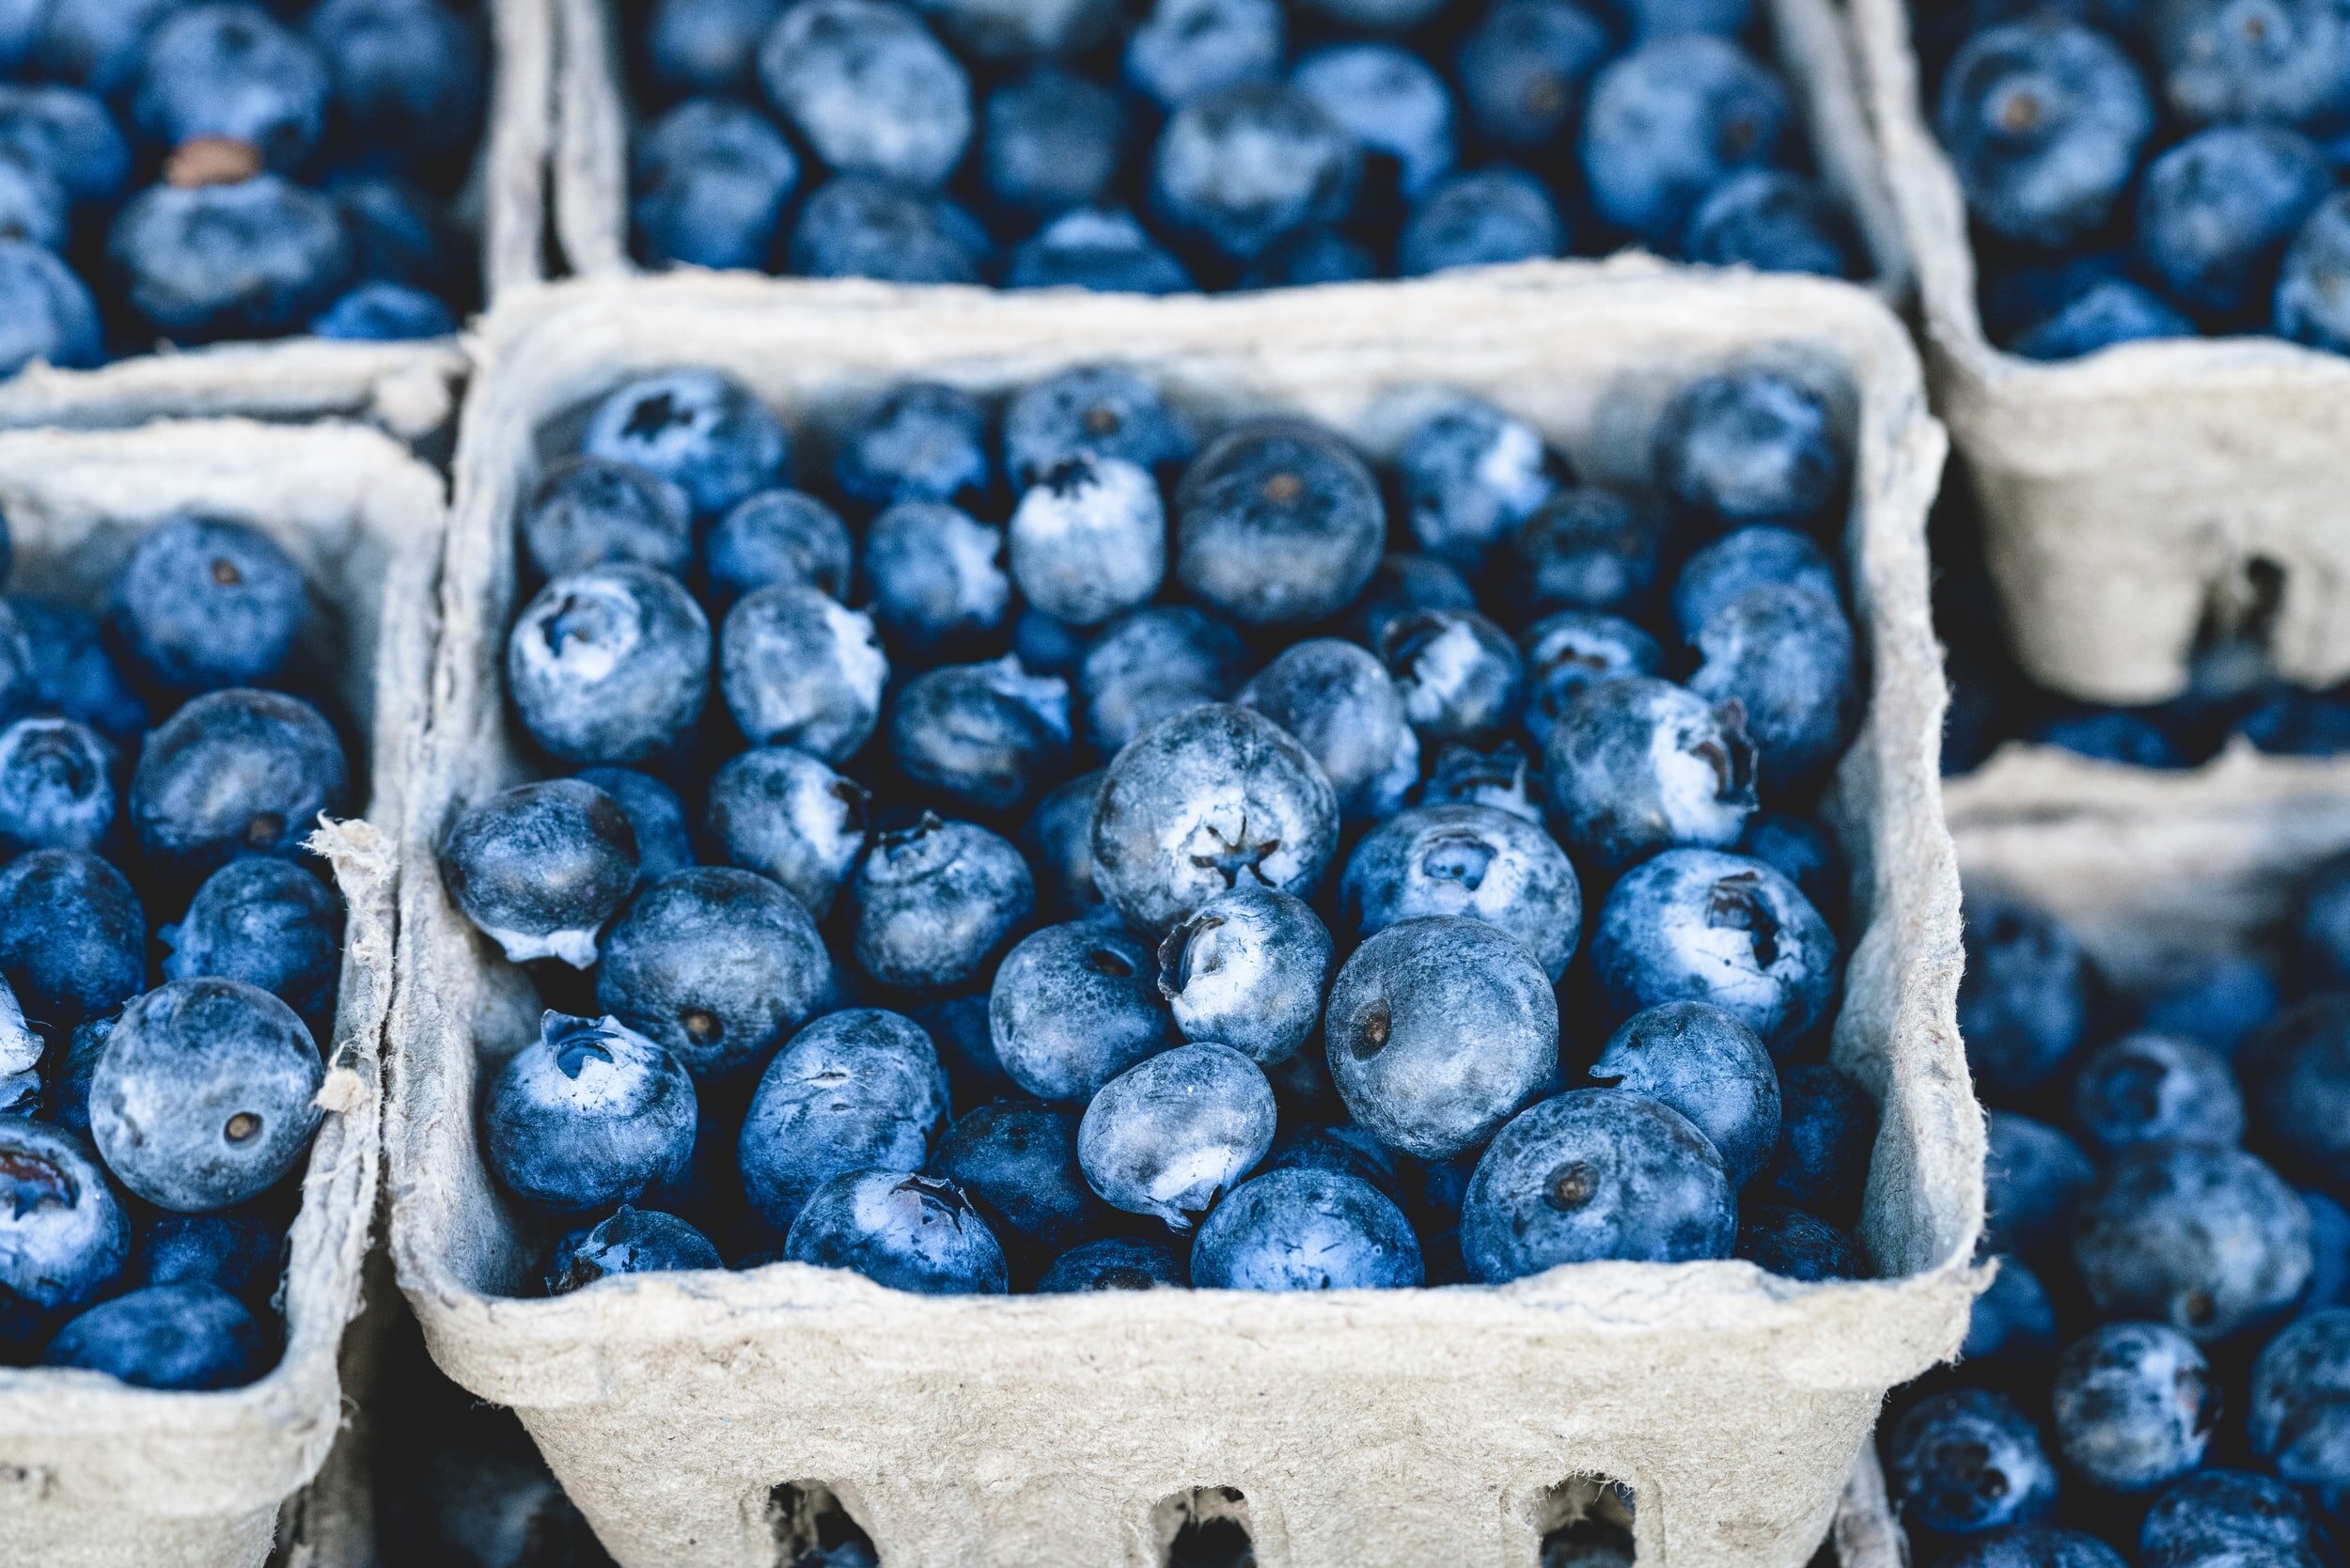 PICTURED: Blueberries are good at preventing oxidative stress, as is CR, as it turns out.